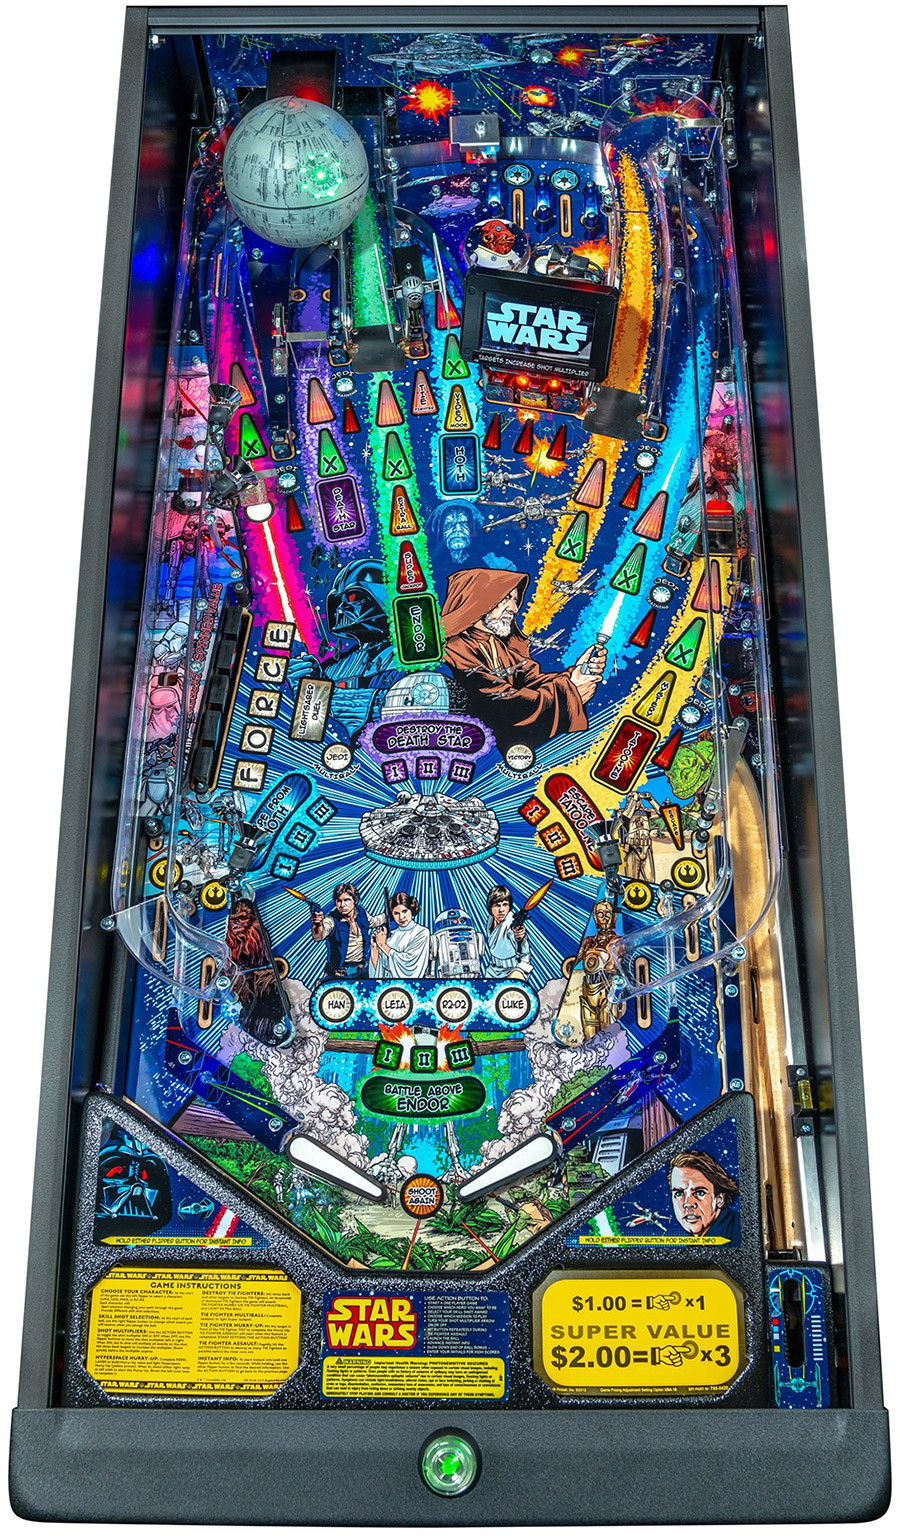 STERN SHOW RE-ARTED STAR WARS – Welcome to Pinball News – First & Free